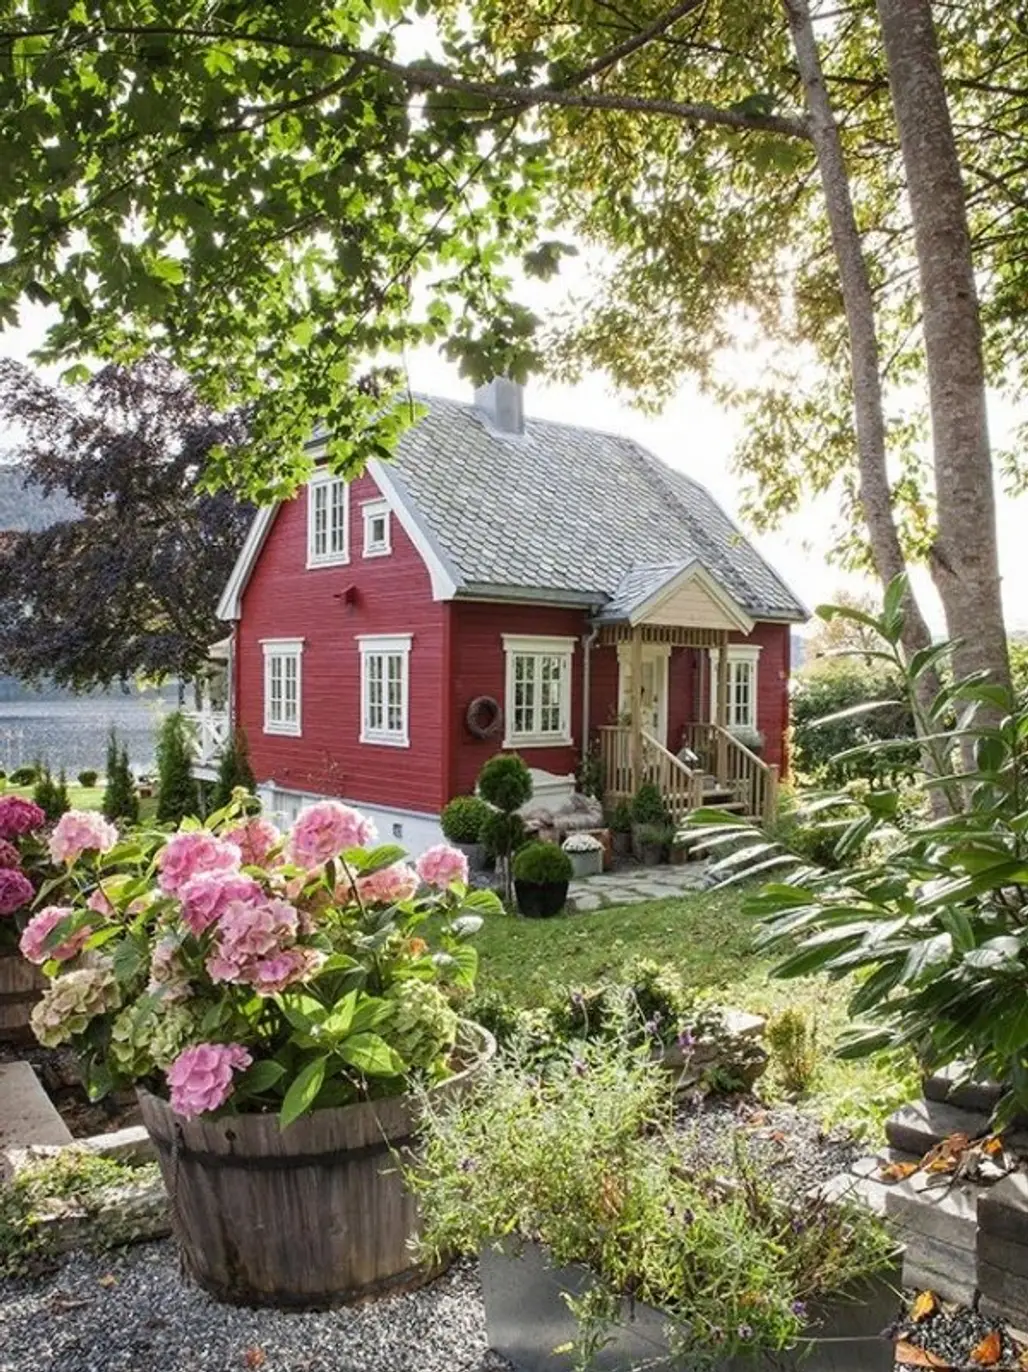 Maybe I Need to Live in a Little Red House by a Fjord